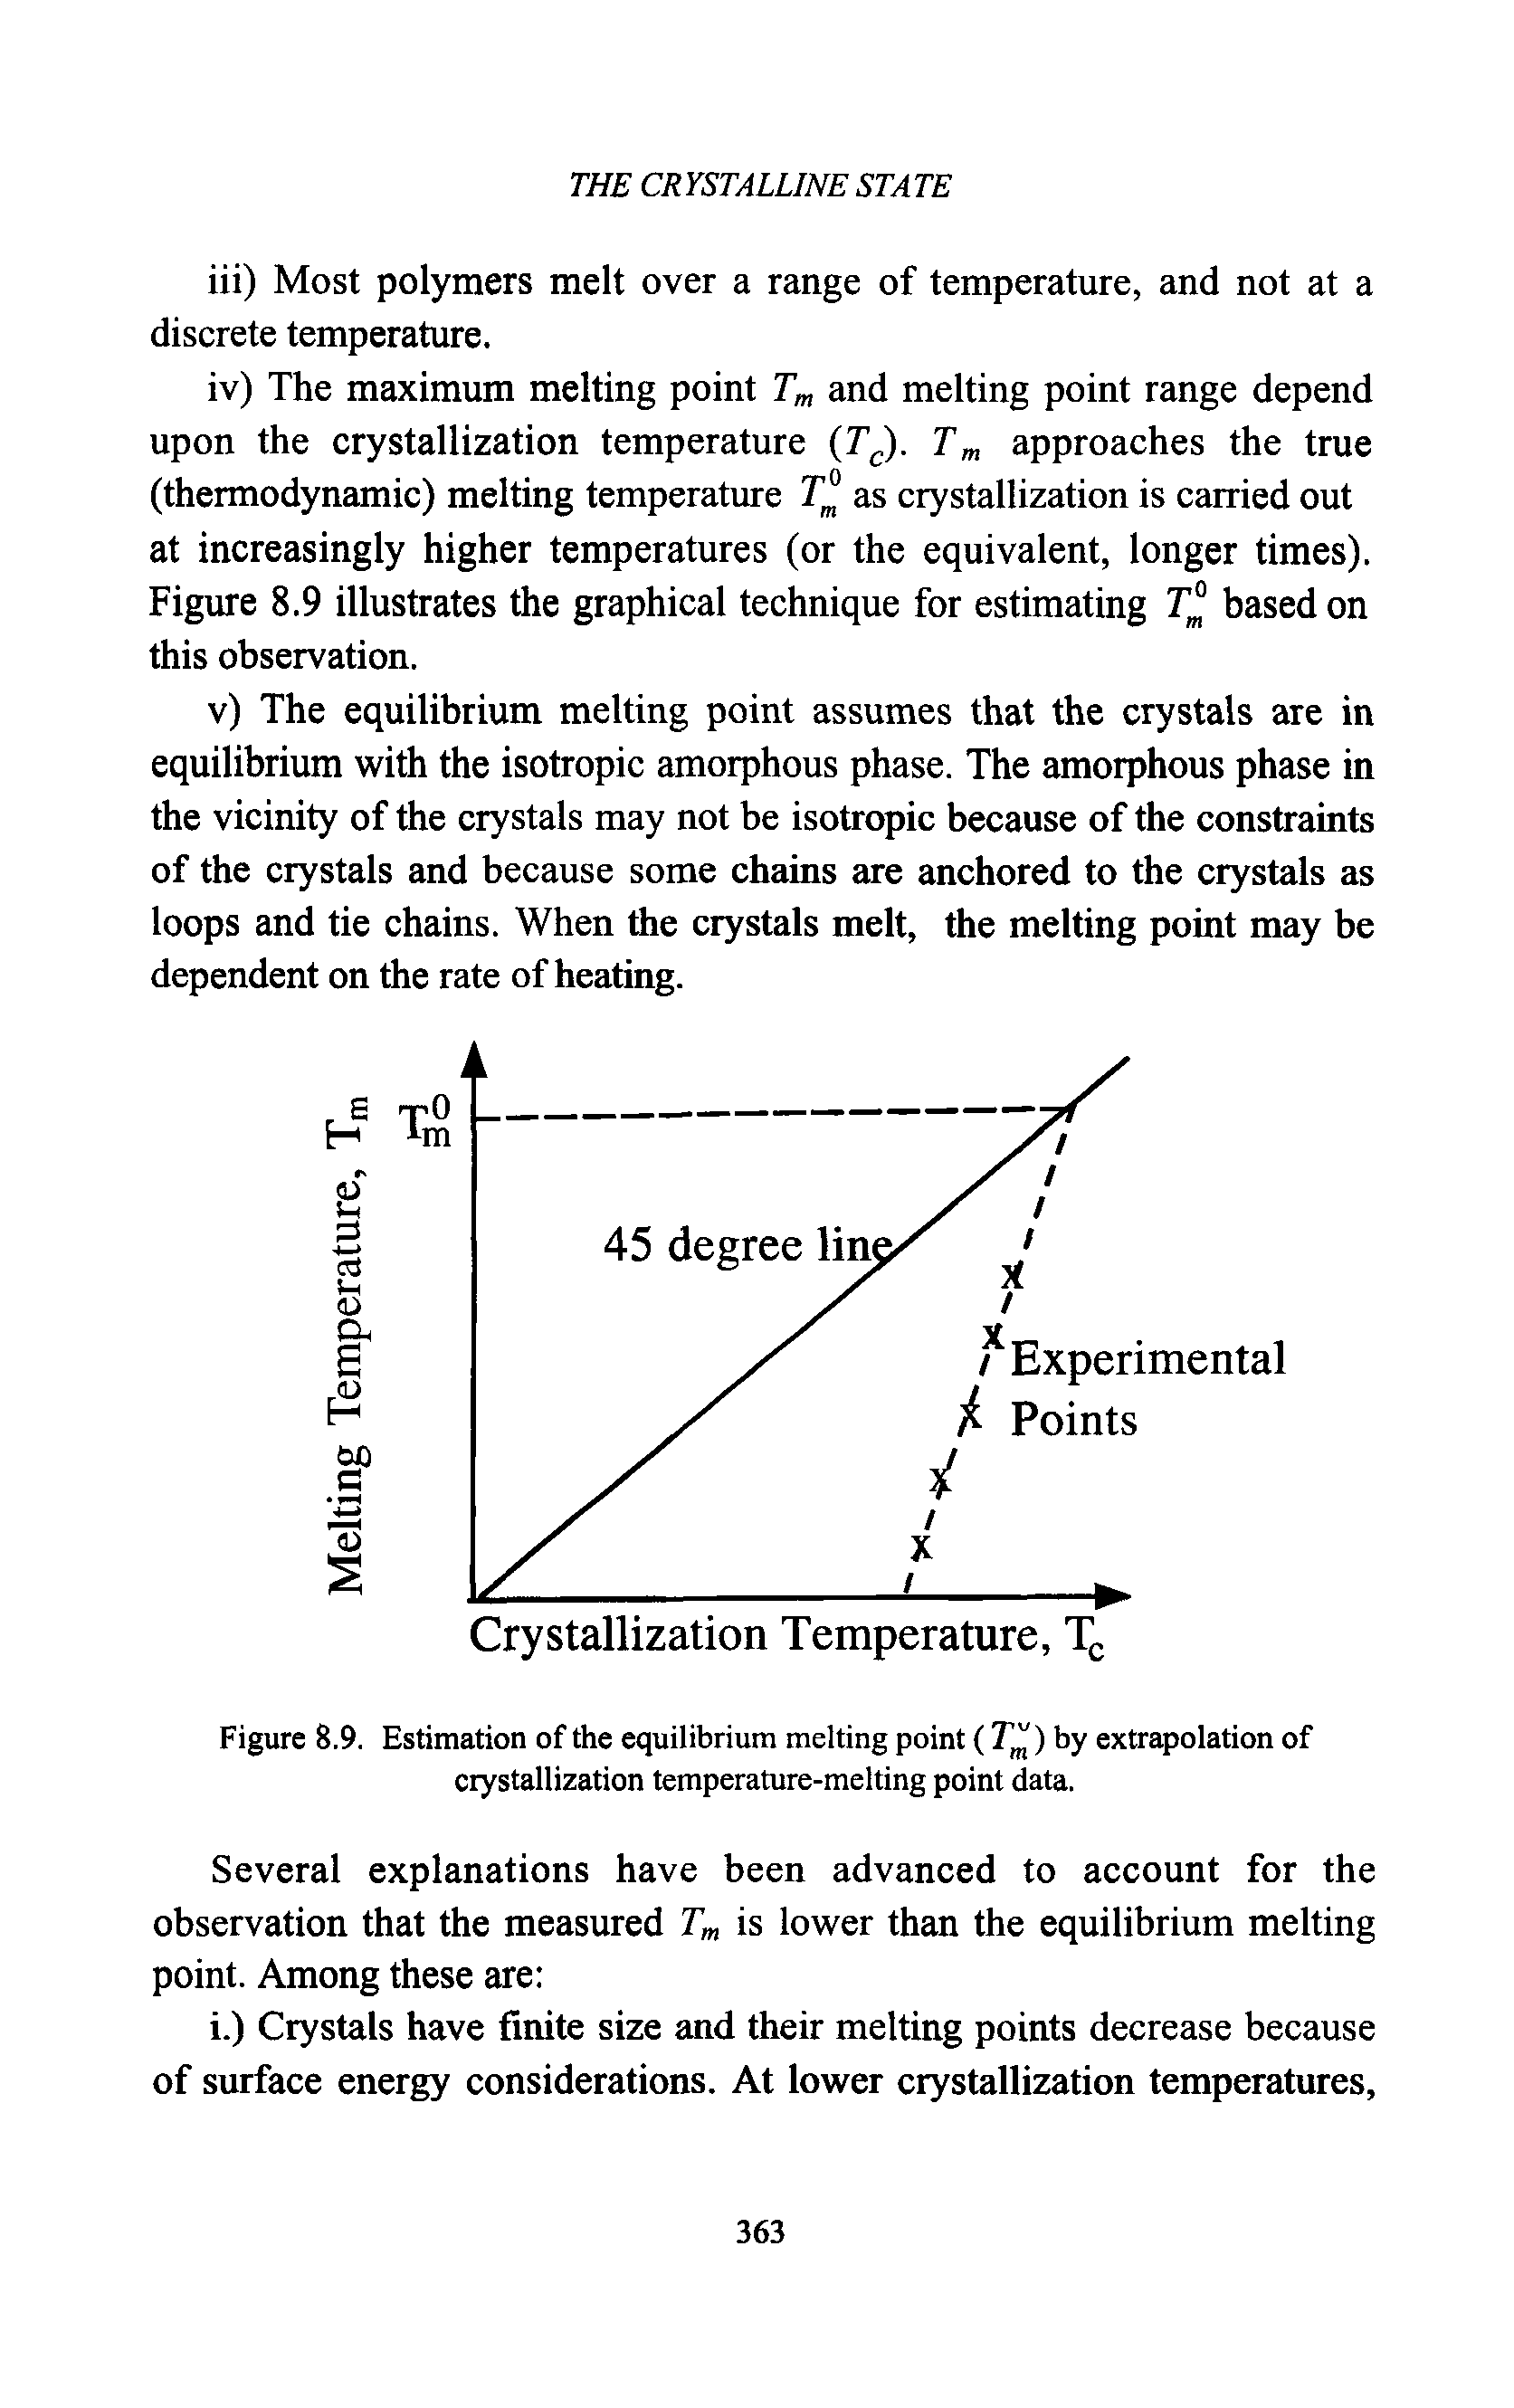 Figure 8.9. Estimation of the equilibrium melting point (by extr olation of crystallization temperature-melting point data.